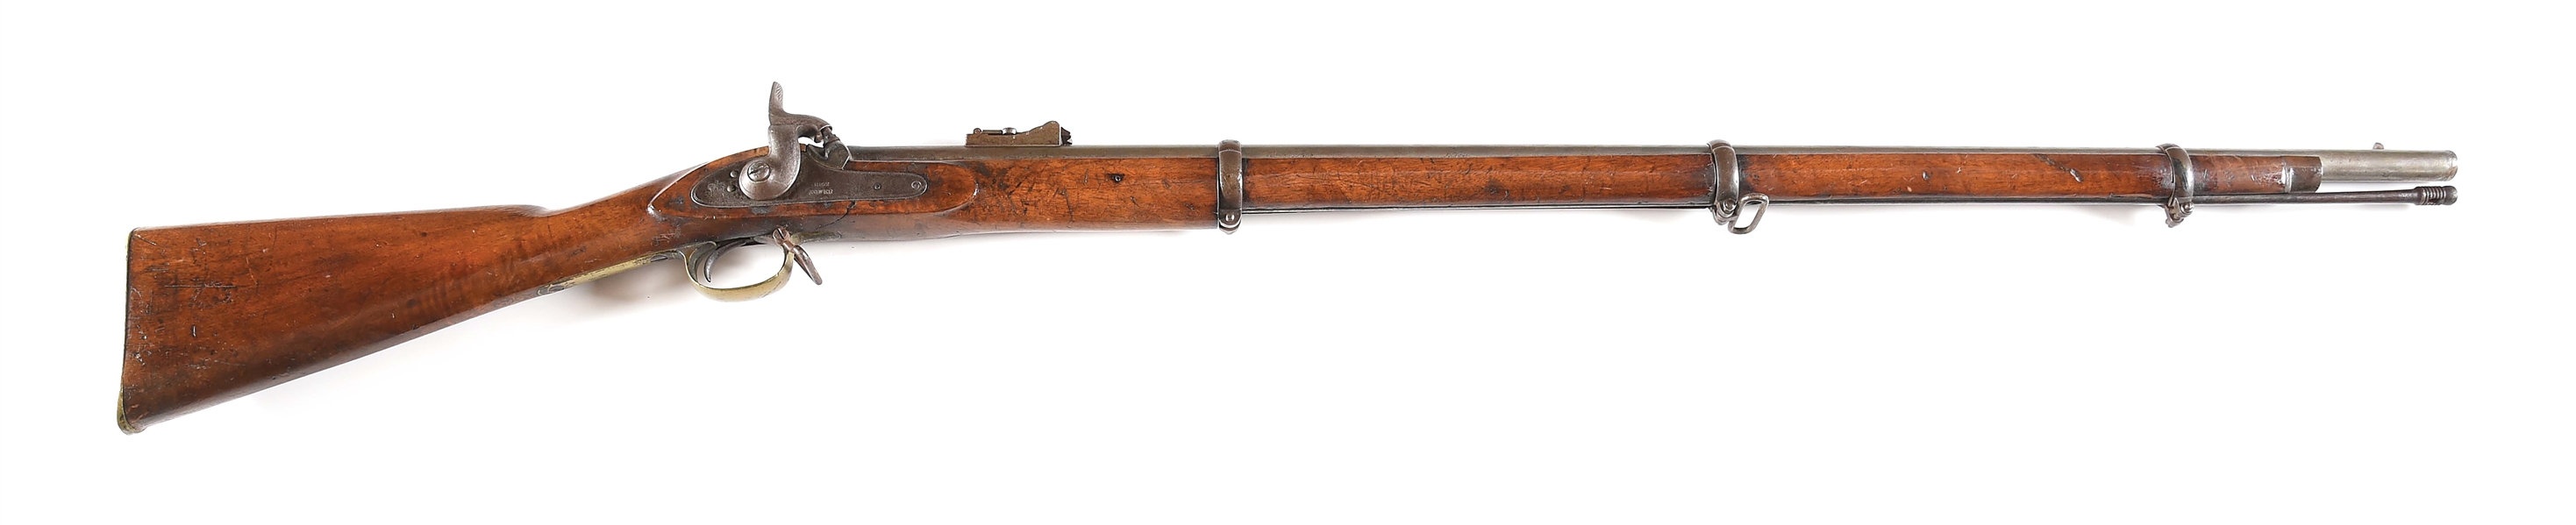 (A) ENFIELD P1853 PERCUSSION RIFLED MUSKET DATED 1862.